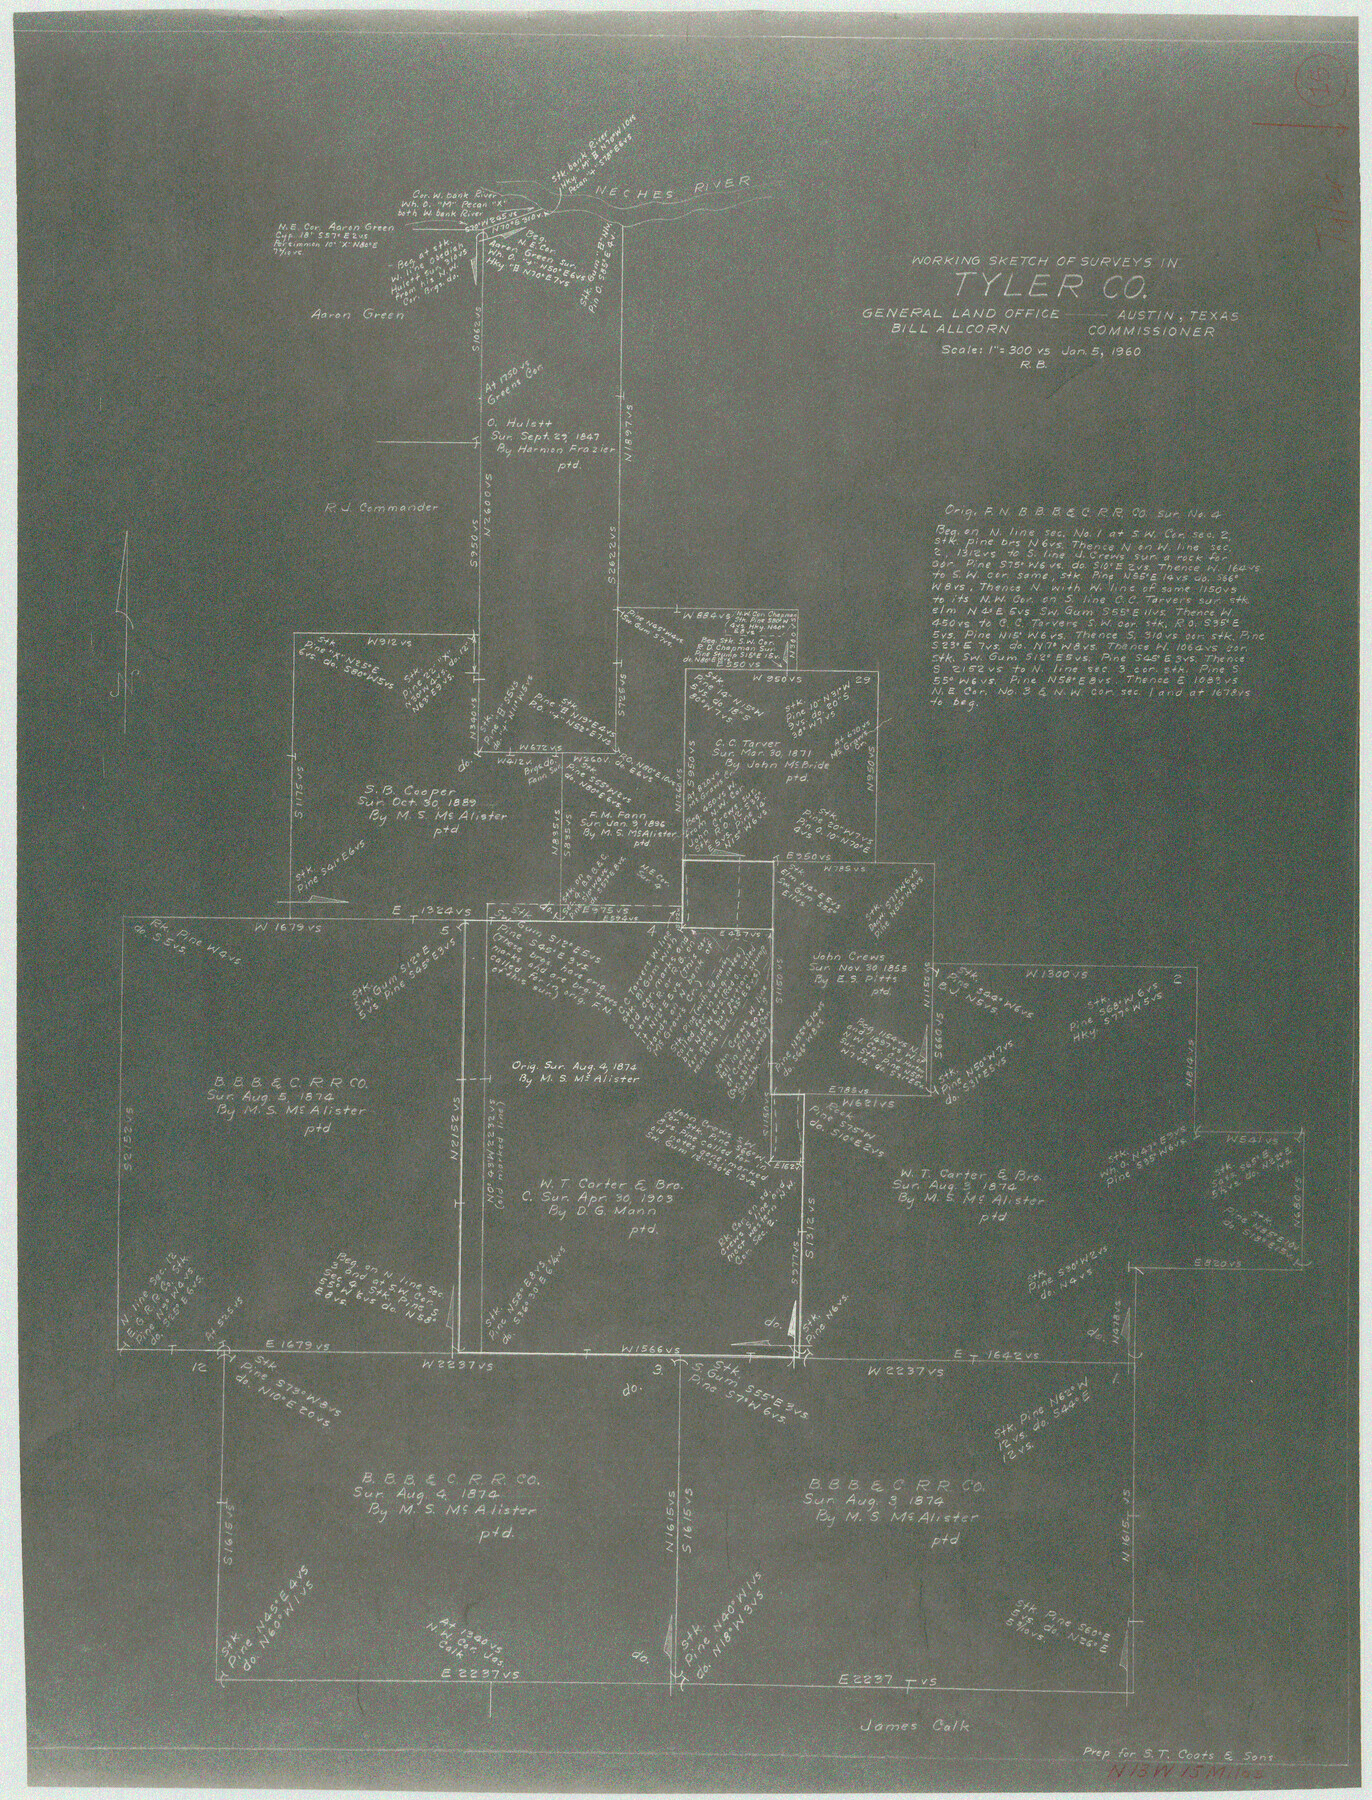 69485, Tyler County Working Sketch 15, General Map Collection